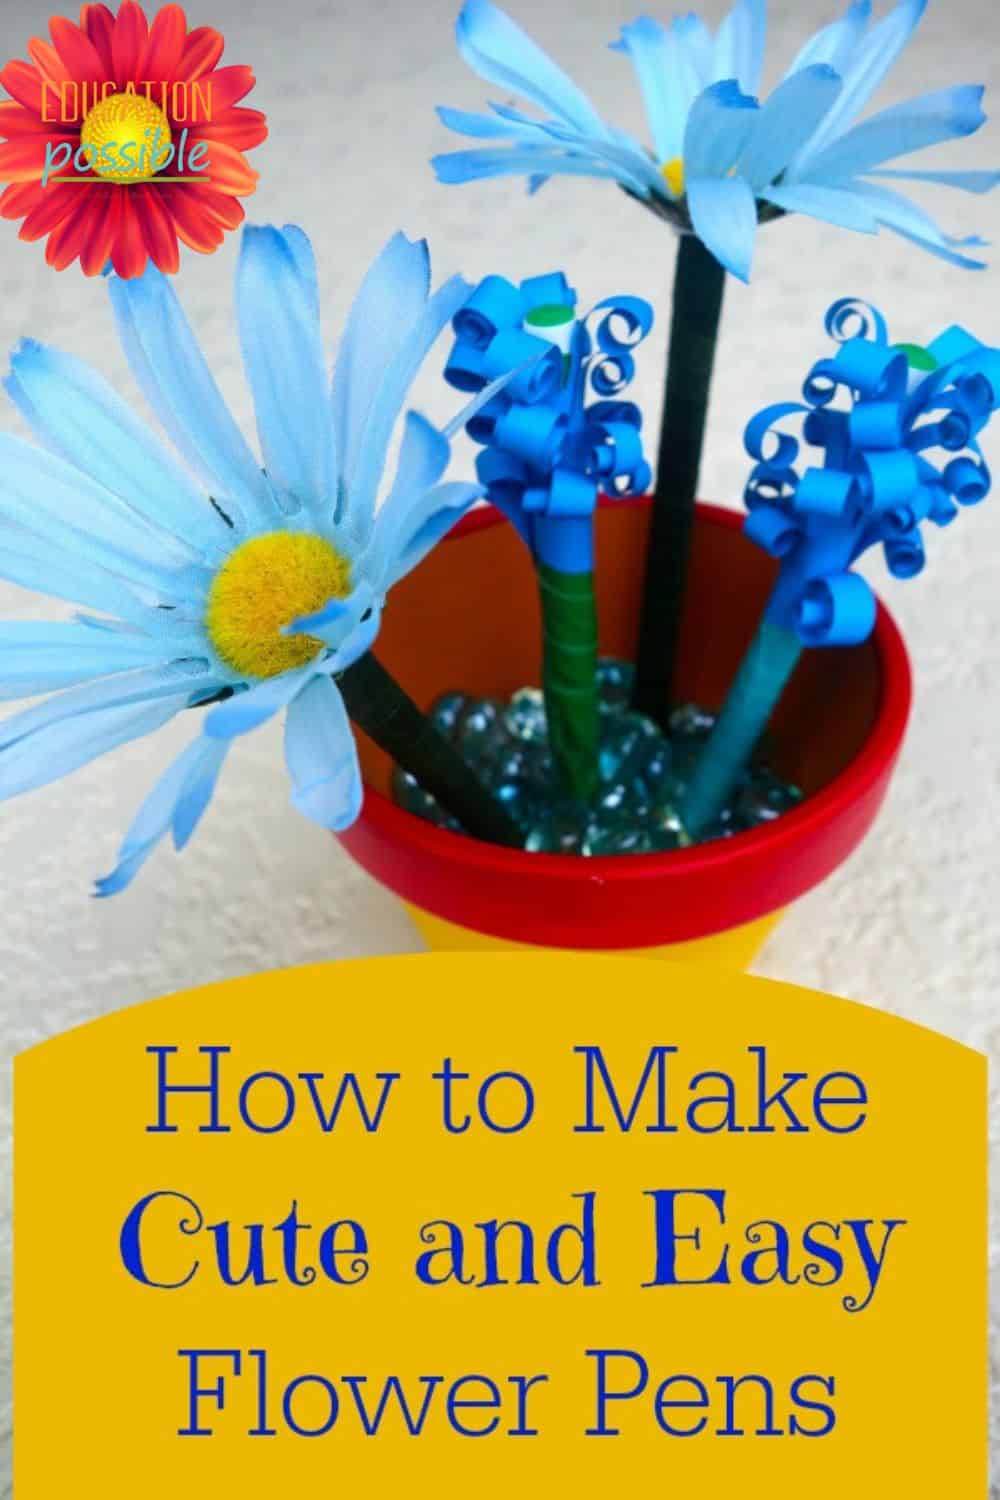 How to Make Cute and Easy Flower Pens